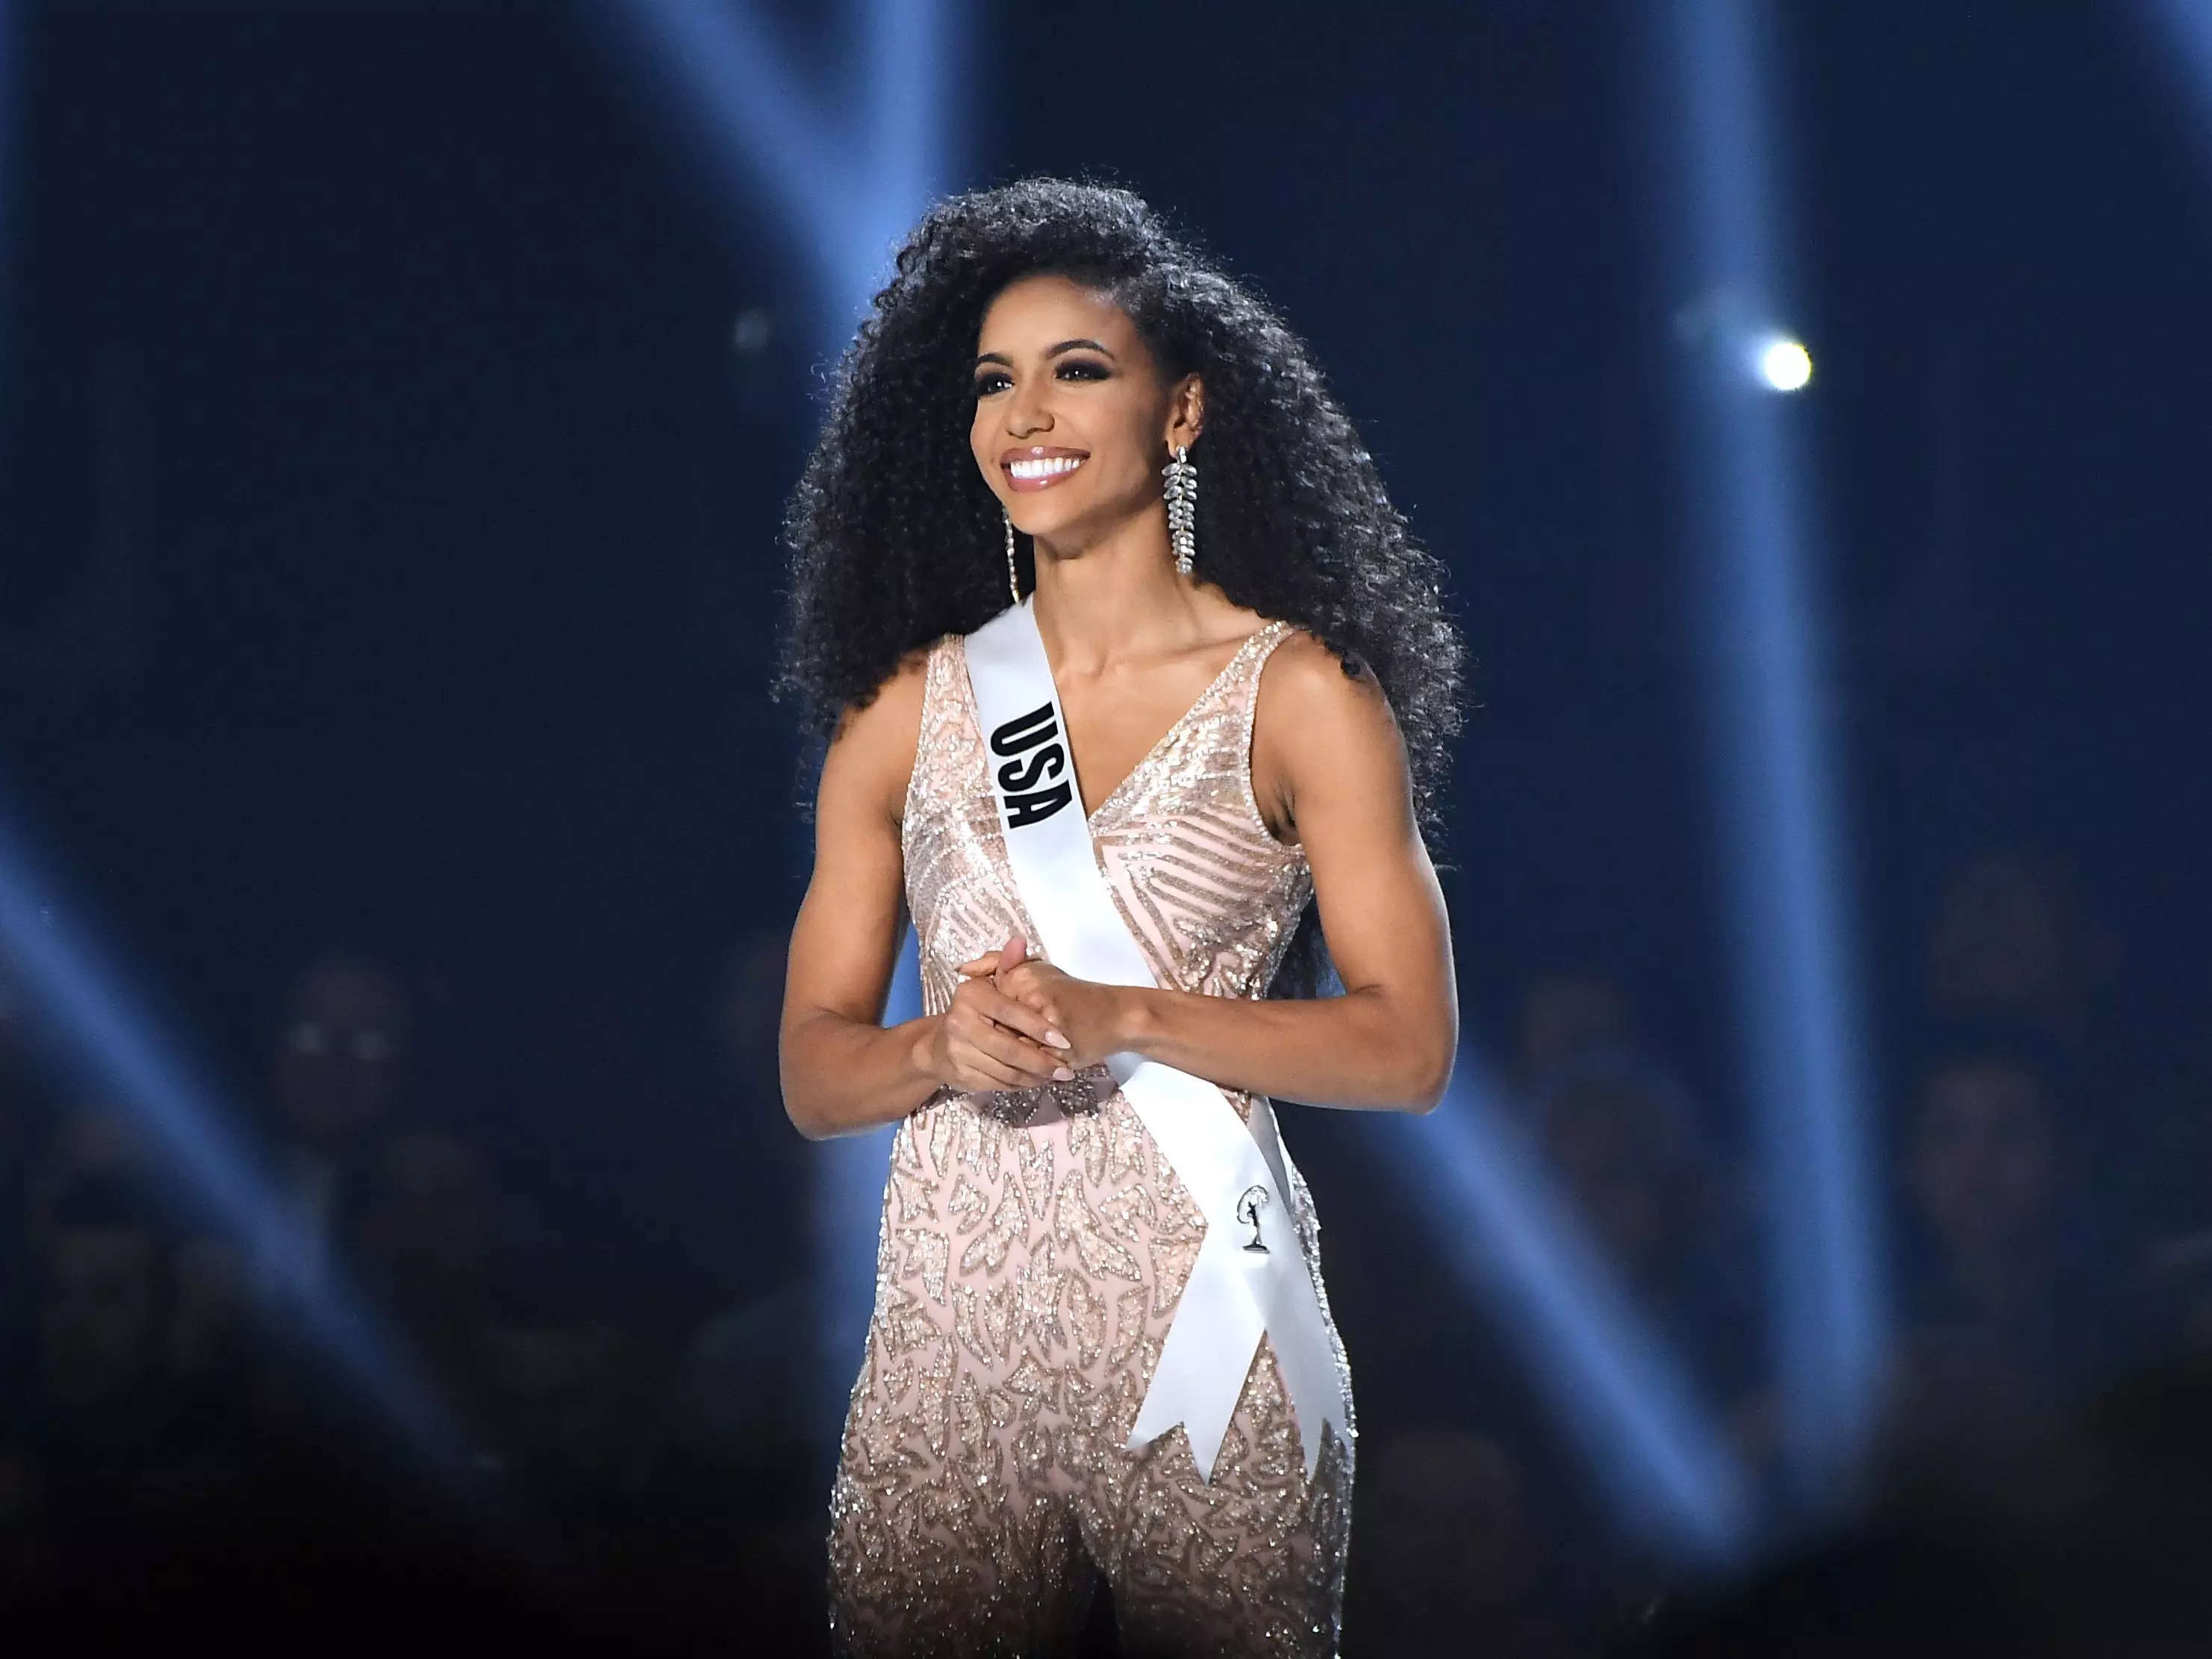 Former Miss USA Cheslie Kryst's mom wants people to stop claiming that her daughter was murdered